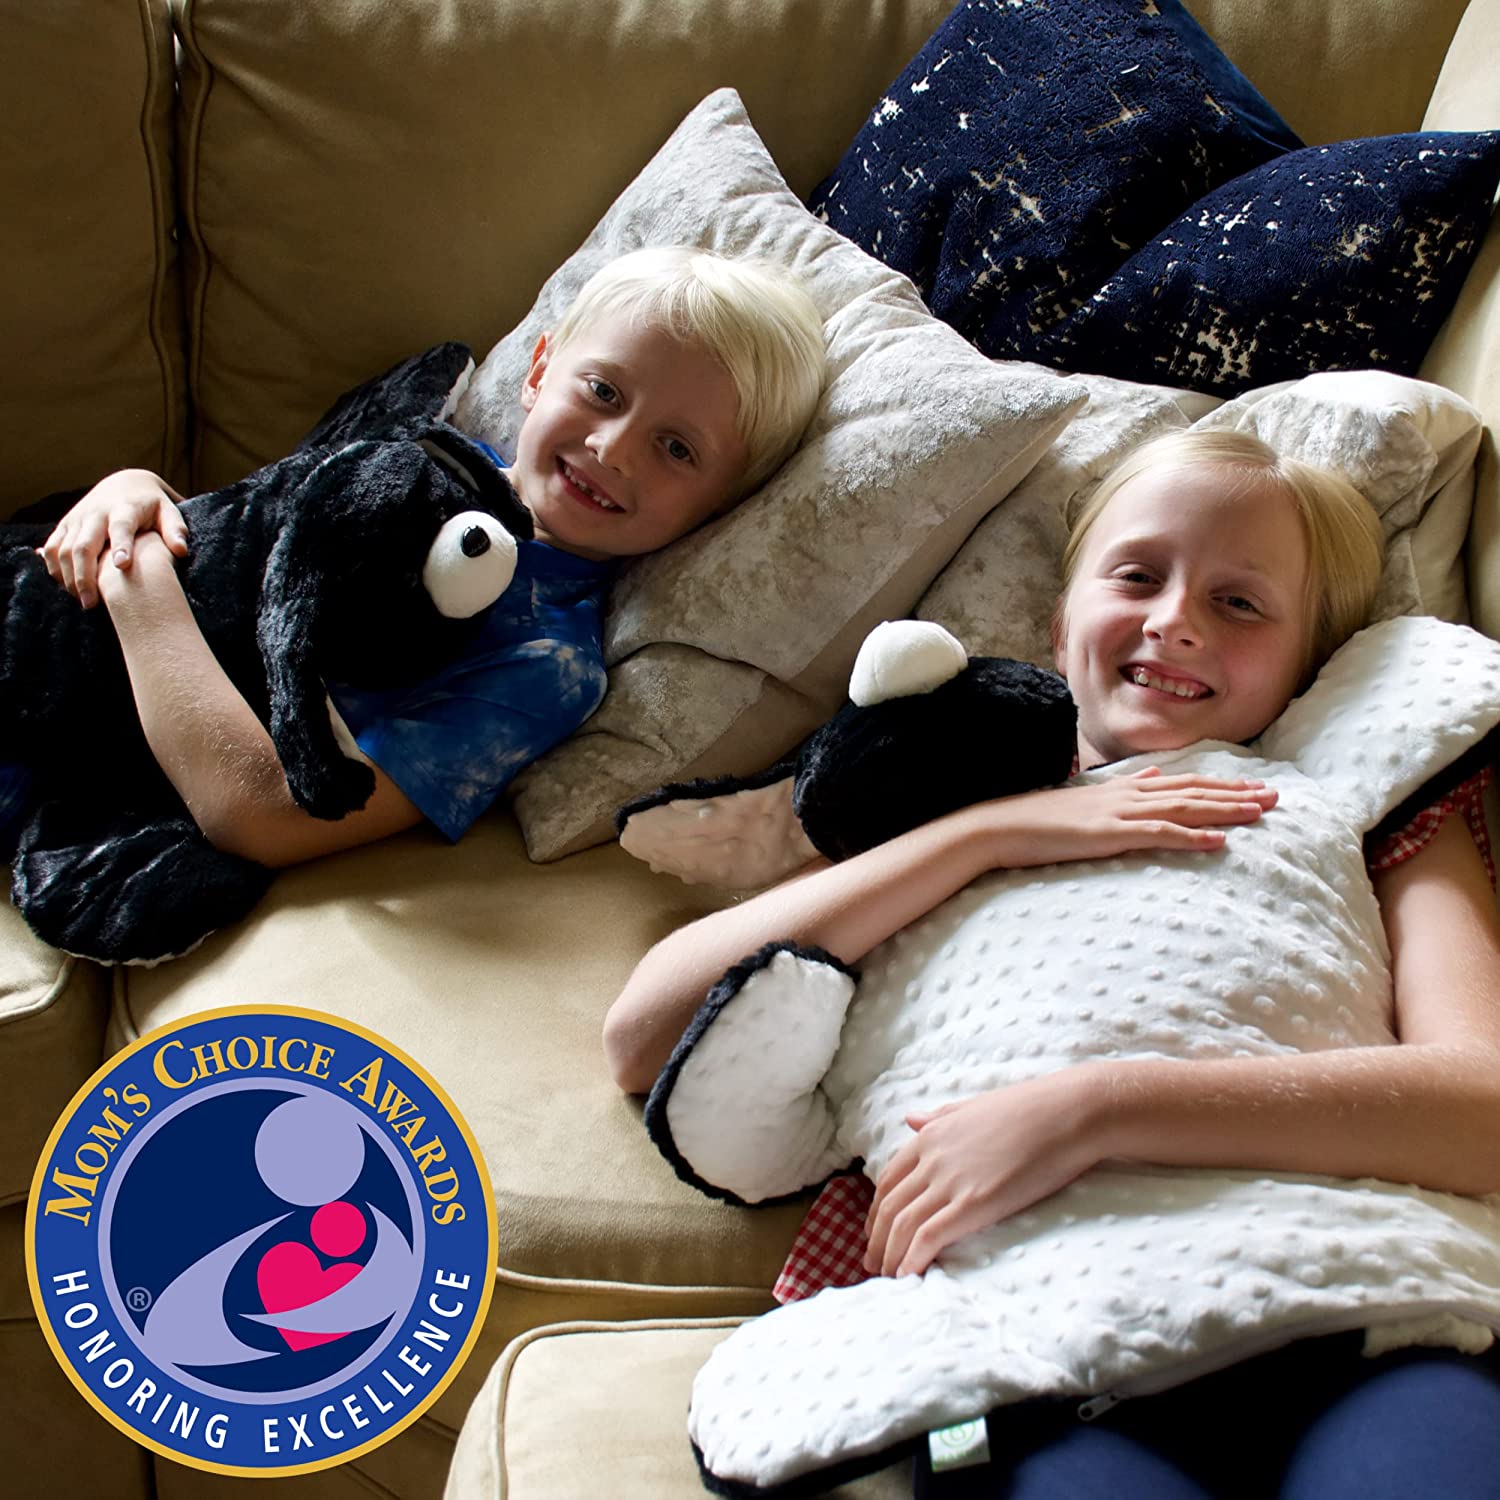 Two children lie on a couch with their heads close together. One has light skin tone and short blone hair; the Barmy Weighted Lap Dog is on their chest and their arms are crossed over the top. The other child has light skin tone and long blonde hair and the Barmy Weighted Lap Dog is upsidedown on their chest, revealing the textured minky belly of the dog.